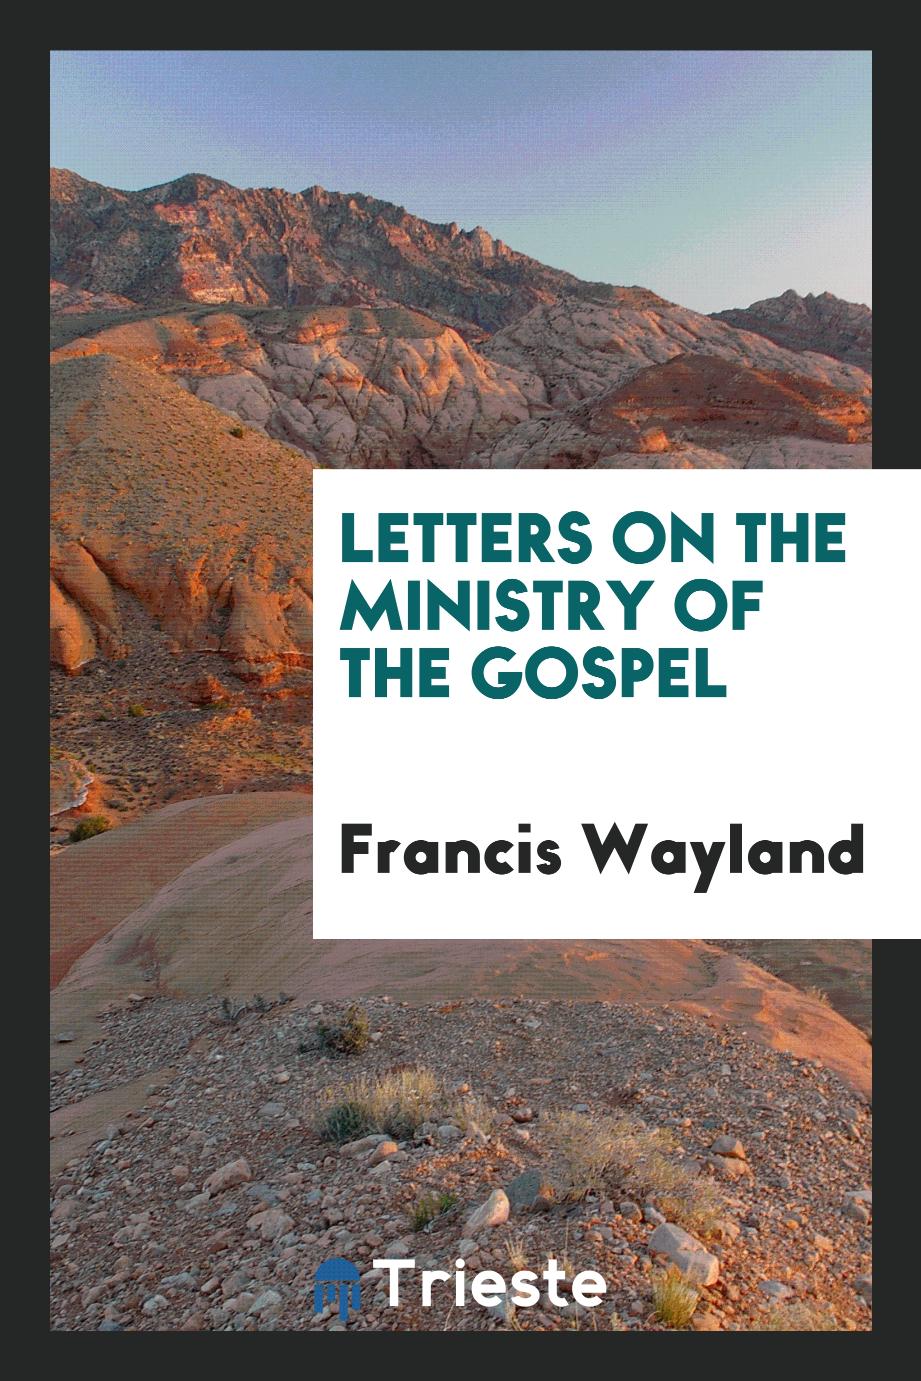 Letters on the ministry of the Gospel